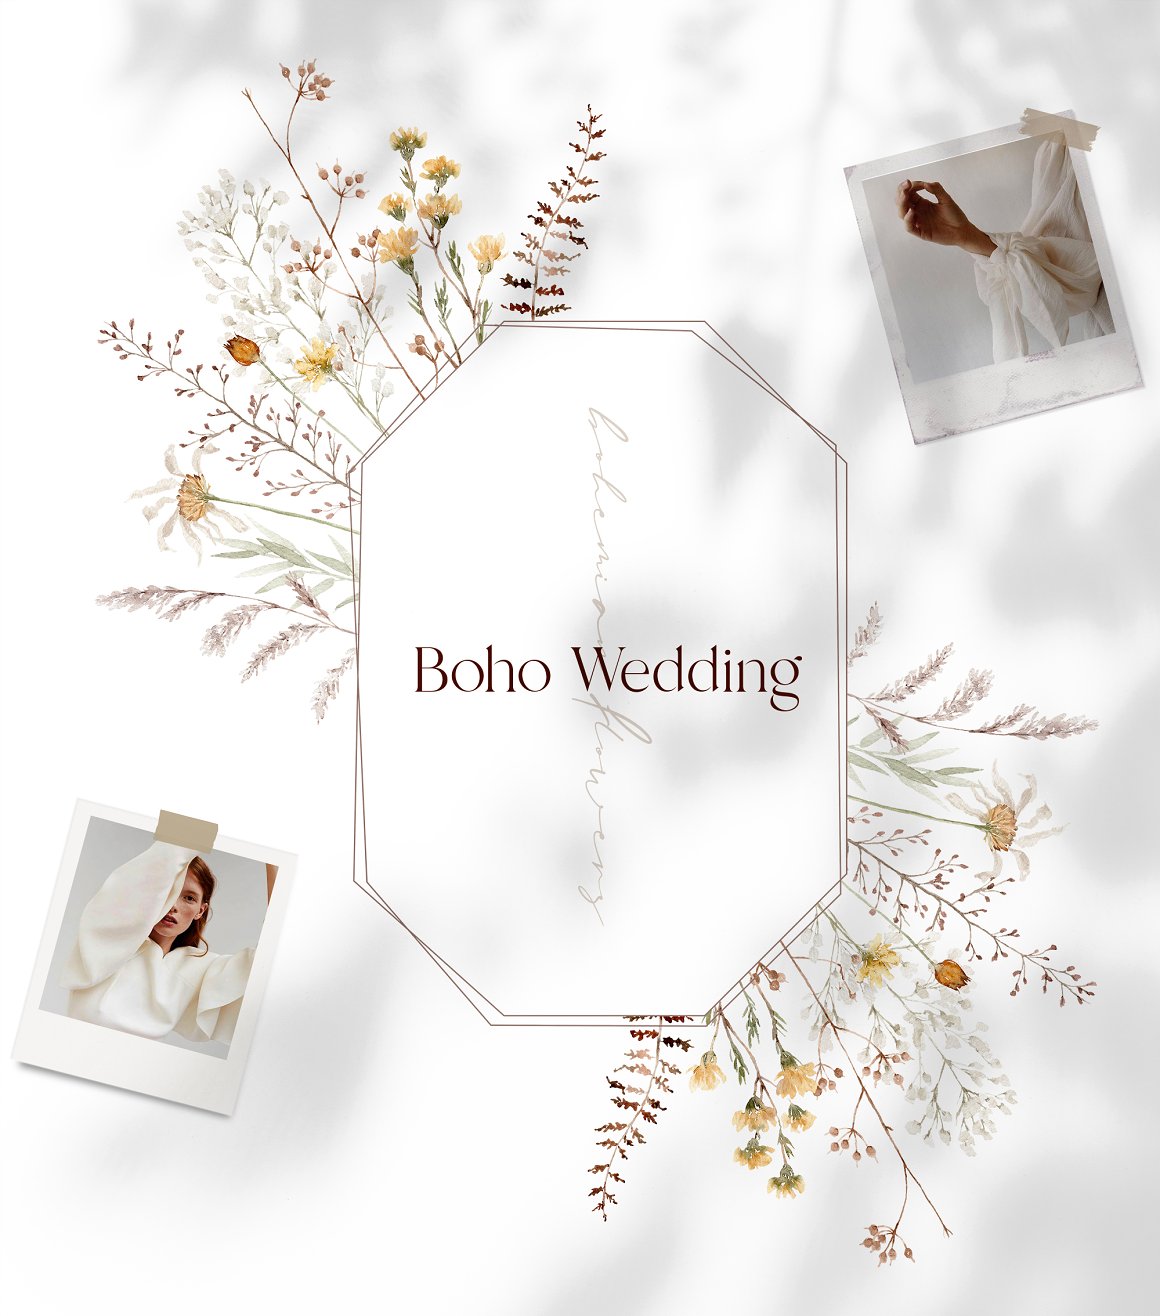 Lettering "Boho Wedding" in frame with flowers and 2 polaroid photos on a white background.